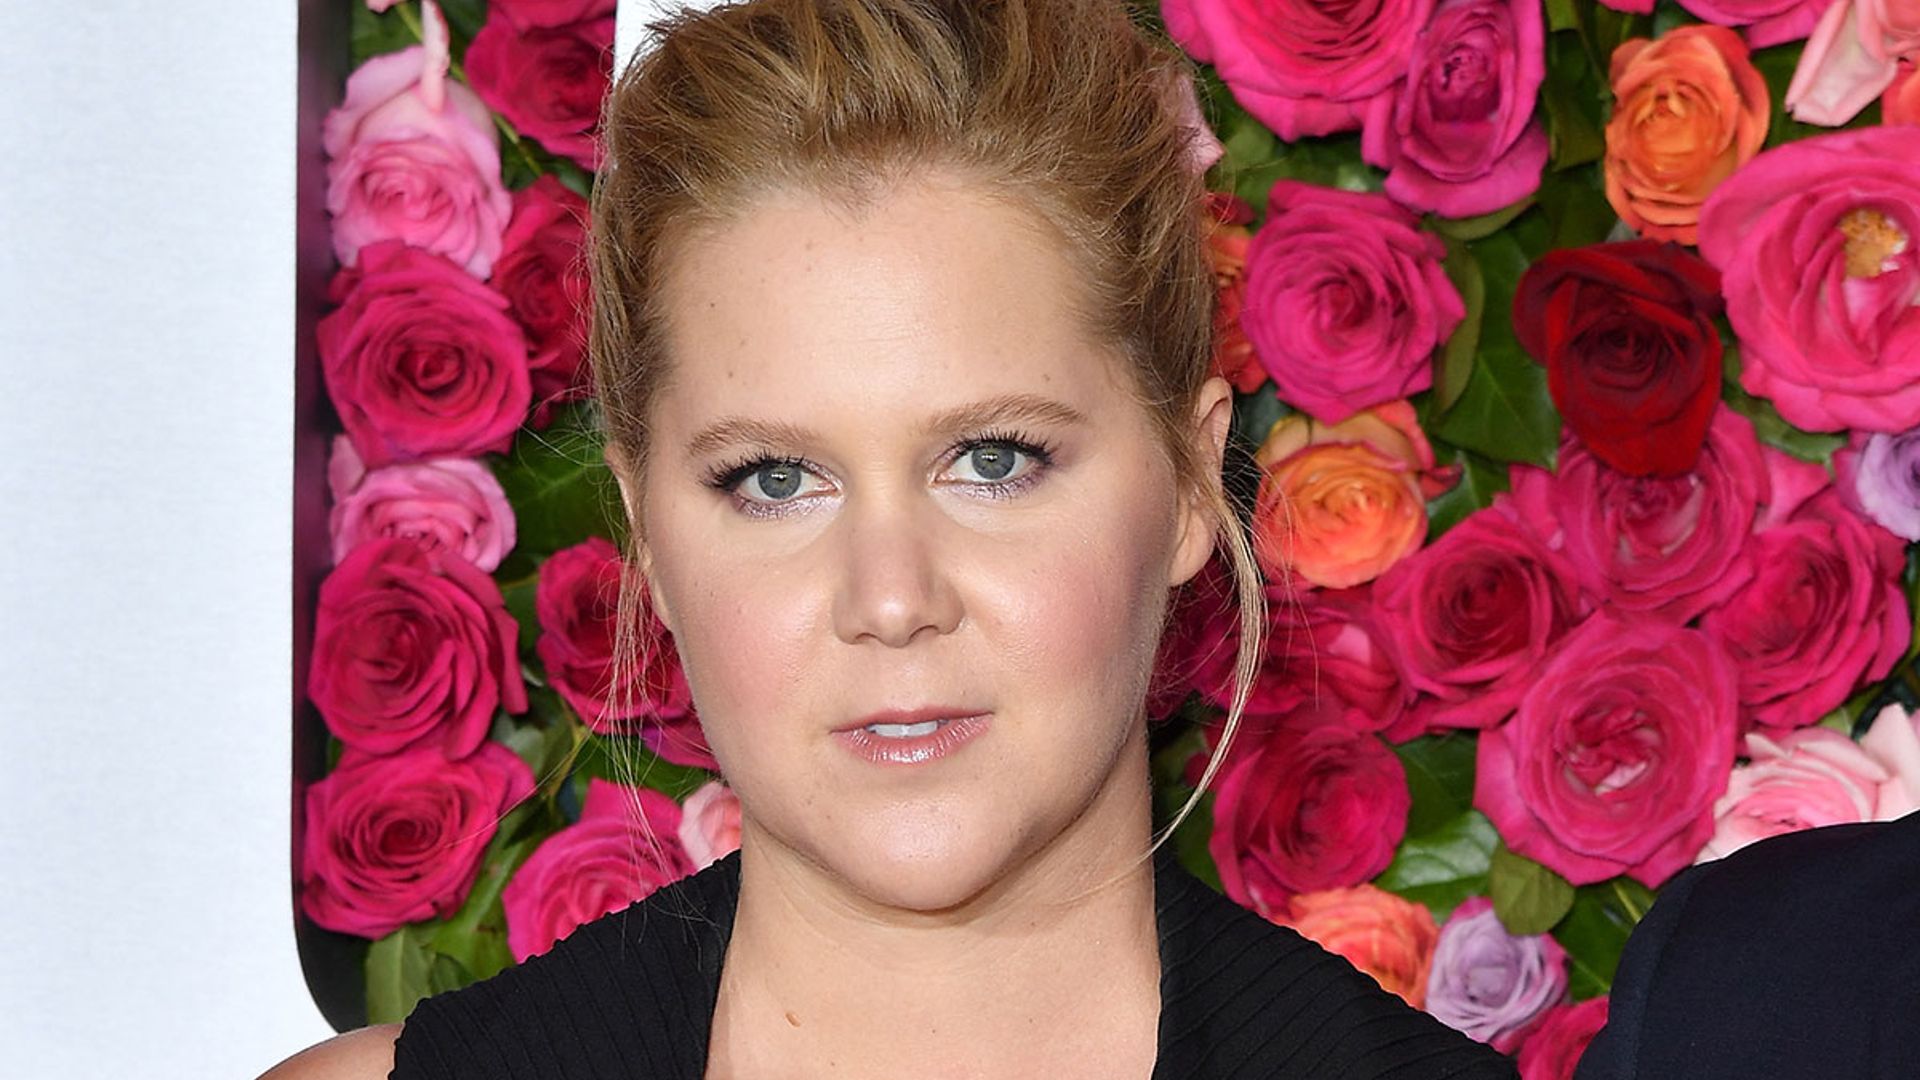 Amy Schumer shares update about son's health diagnosis